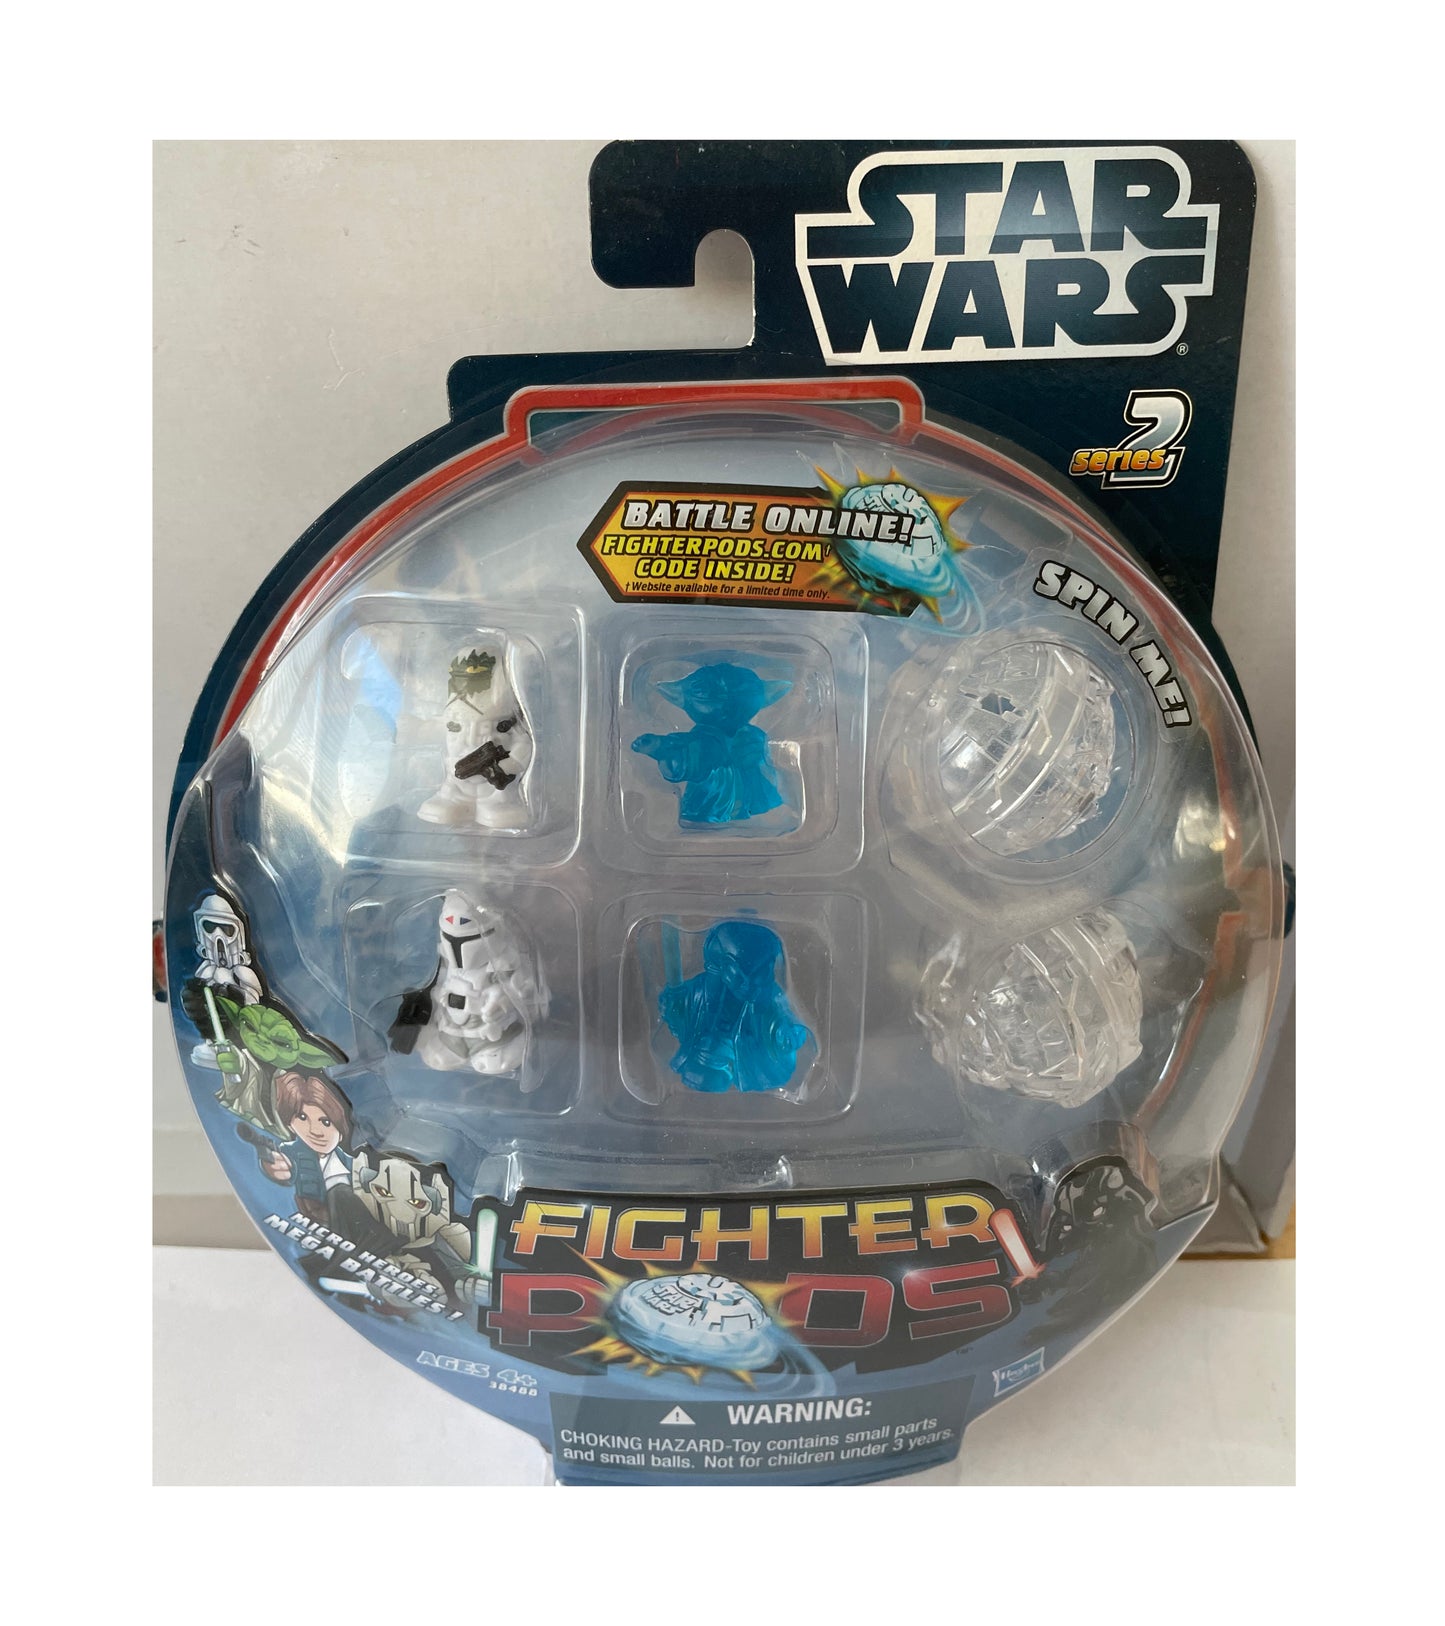 Vintage 2012 Star Wars The Fighter Pods Series 2 Micro Heroes Action Figures And Pod Set - Factory Sealed Shop Stock Room Find